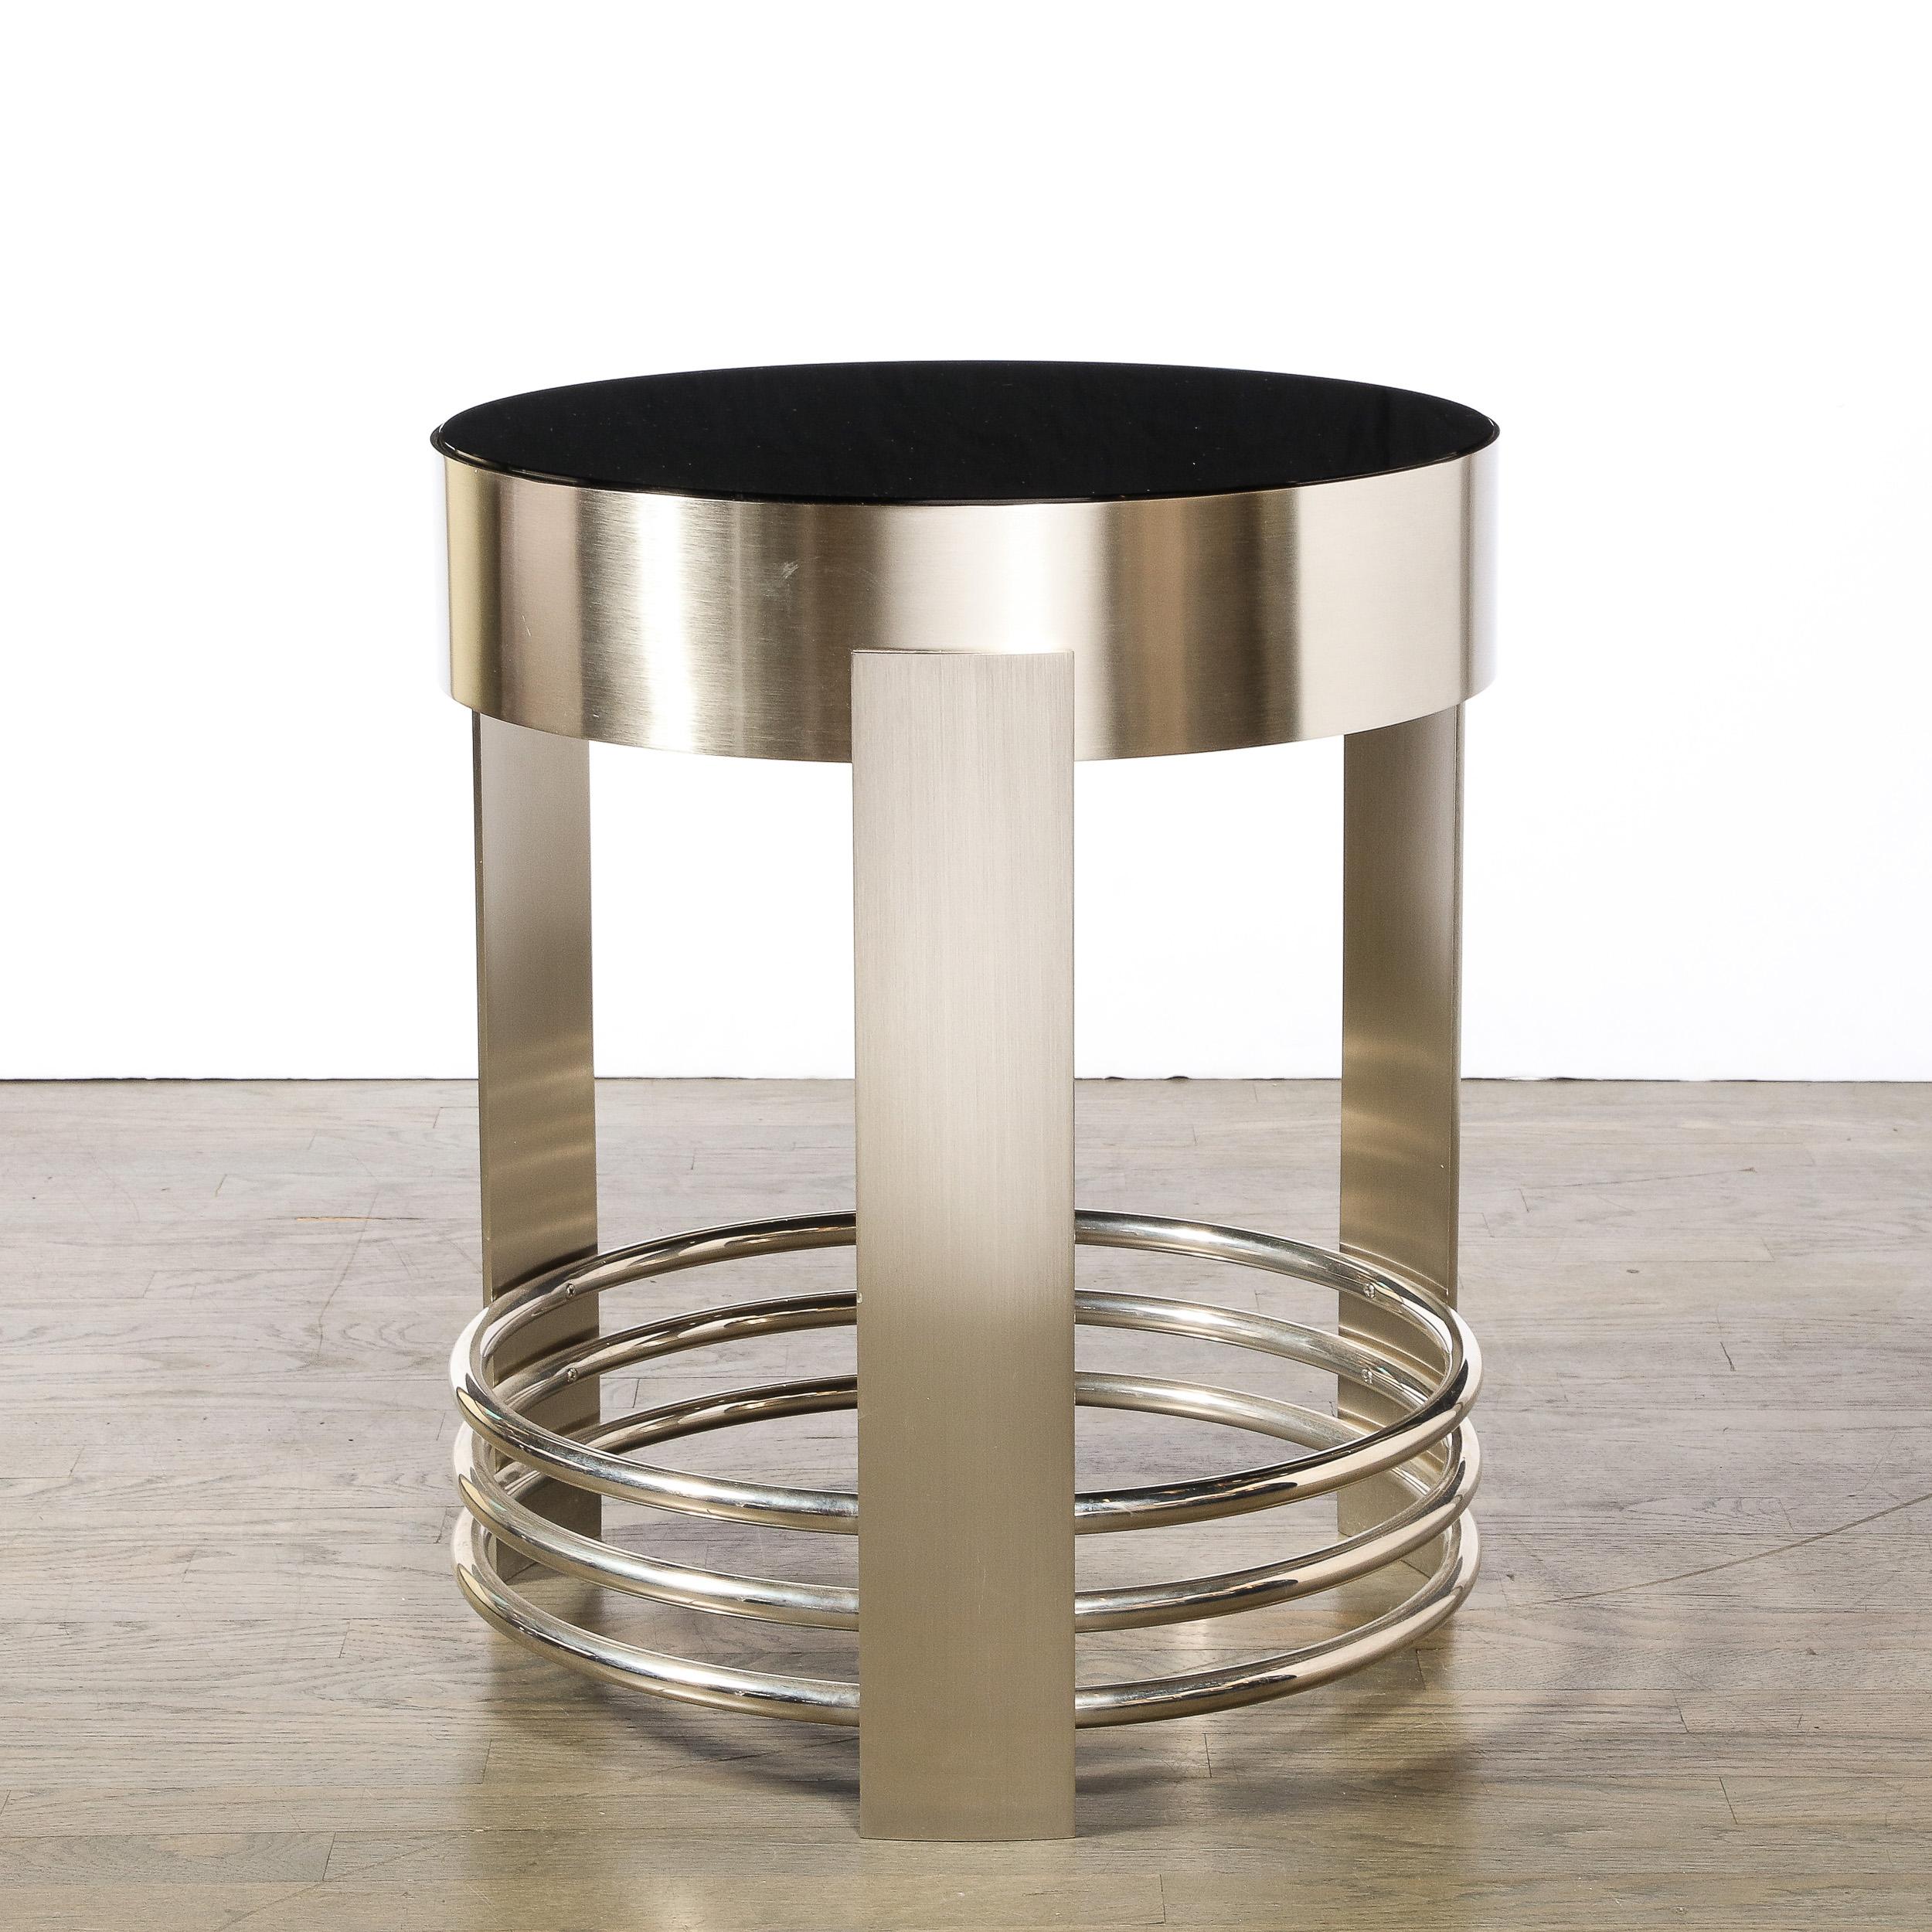 Art Deco Revival Occasional Table in Brushed Nickel with Polished Banding 2